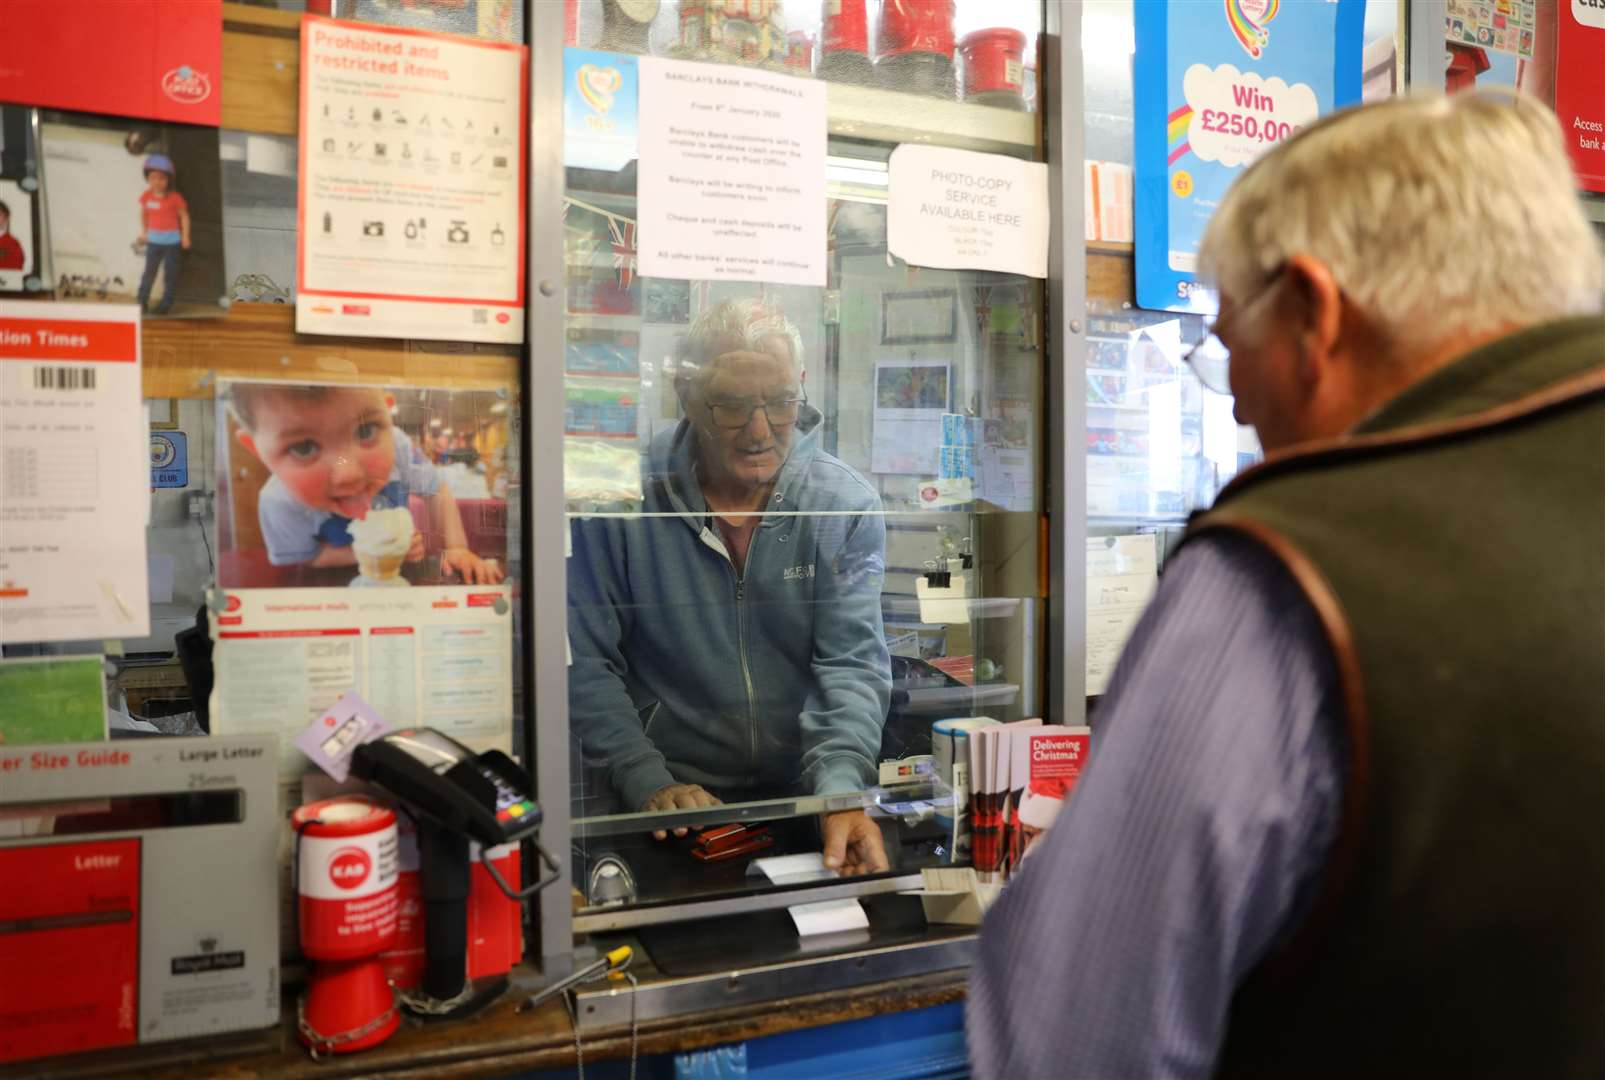 Post Office branches often rely on subsidy from the Government. Picture: Andy Jones